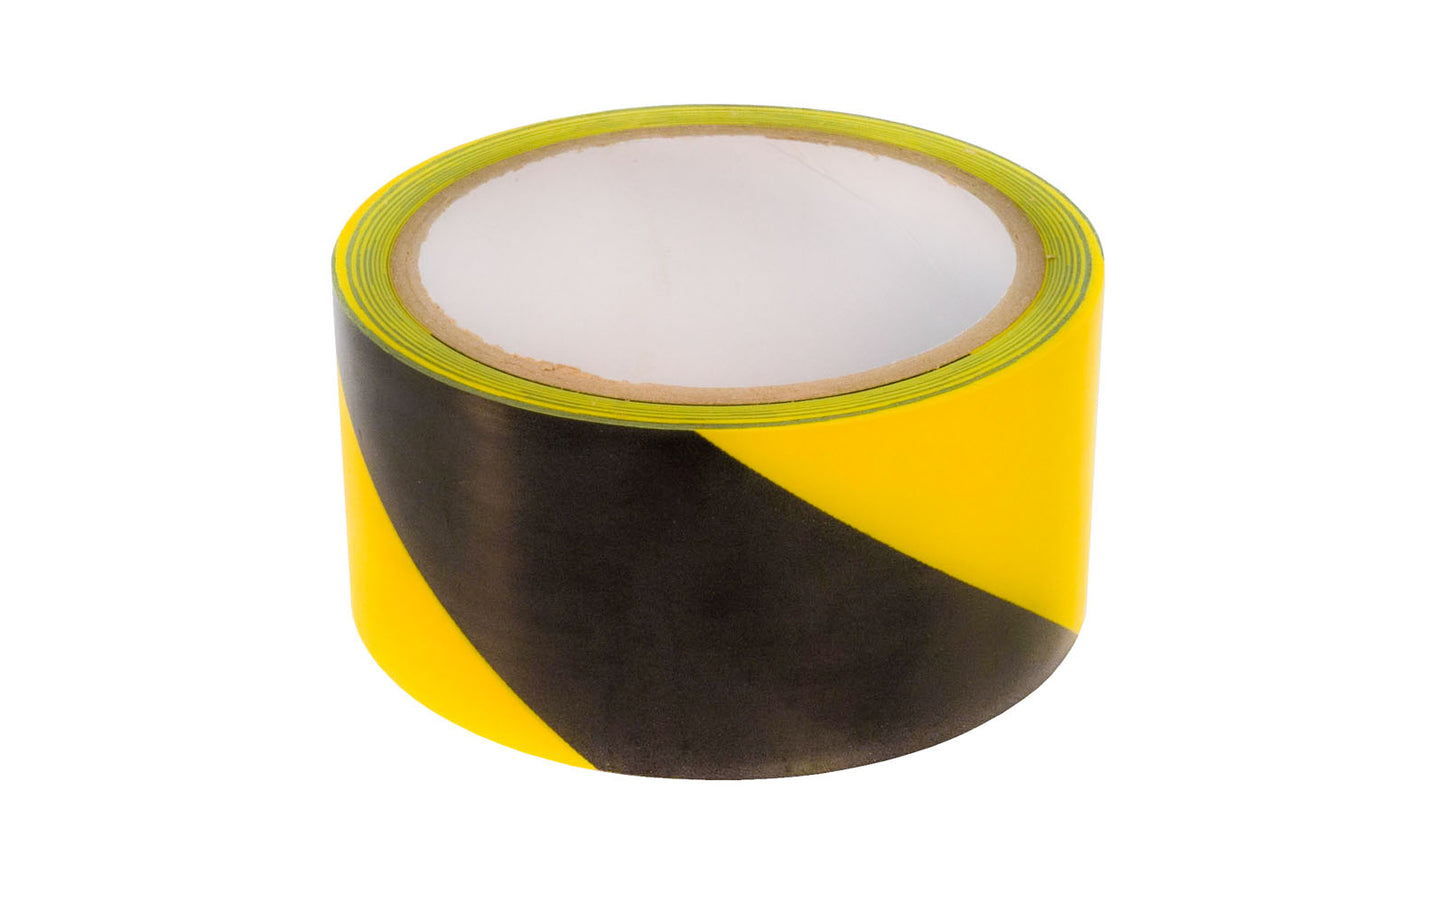 Swanson 2" x 54' Black / Yellow Safety Floor Tape. Adhesive backed. Model AMT18Y. 038987640001. Caution Tape